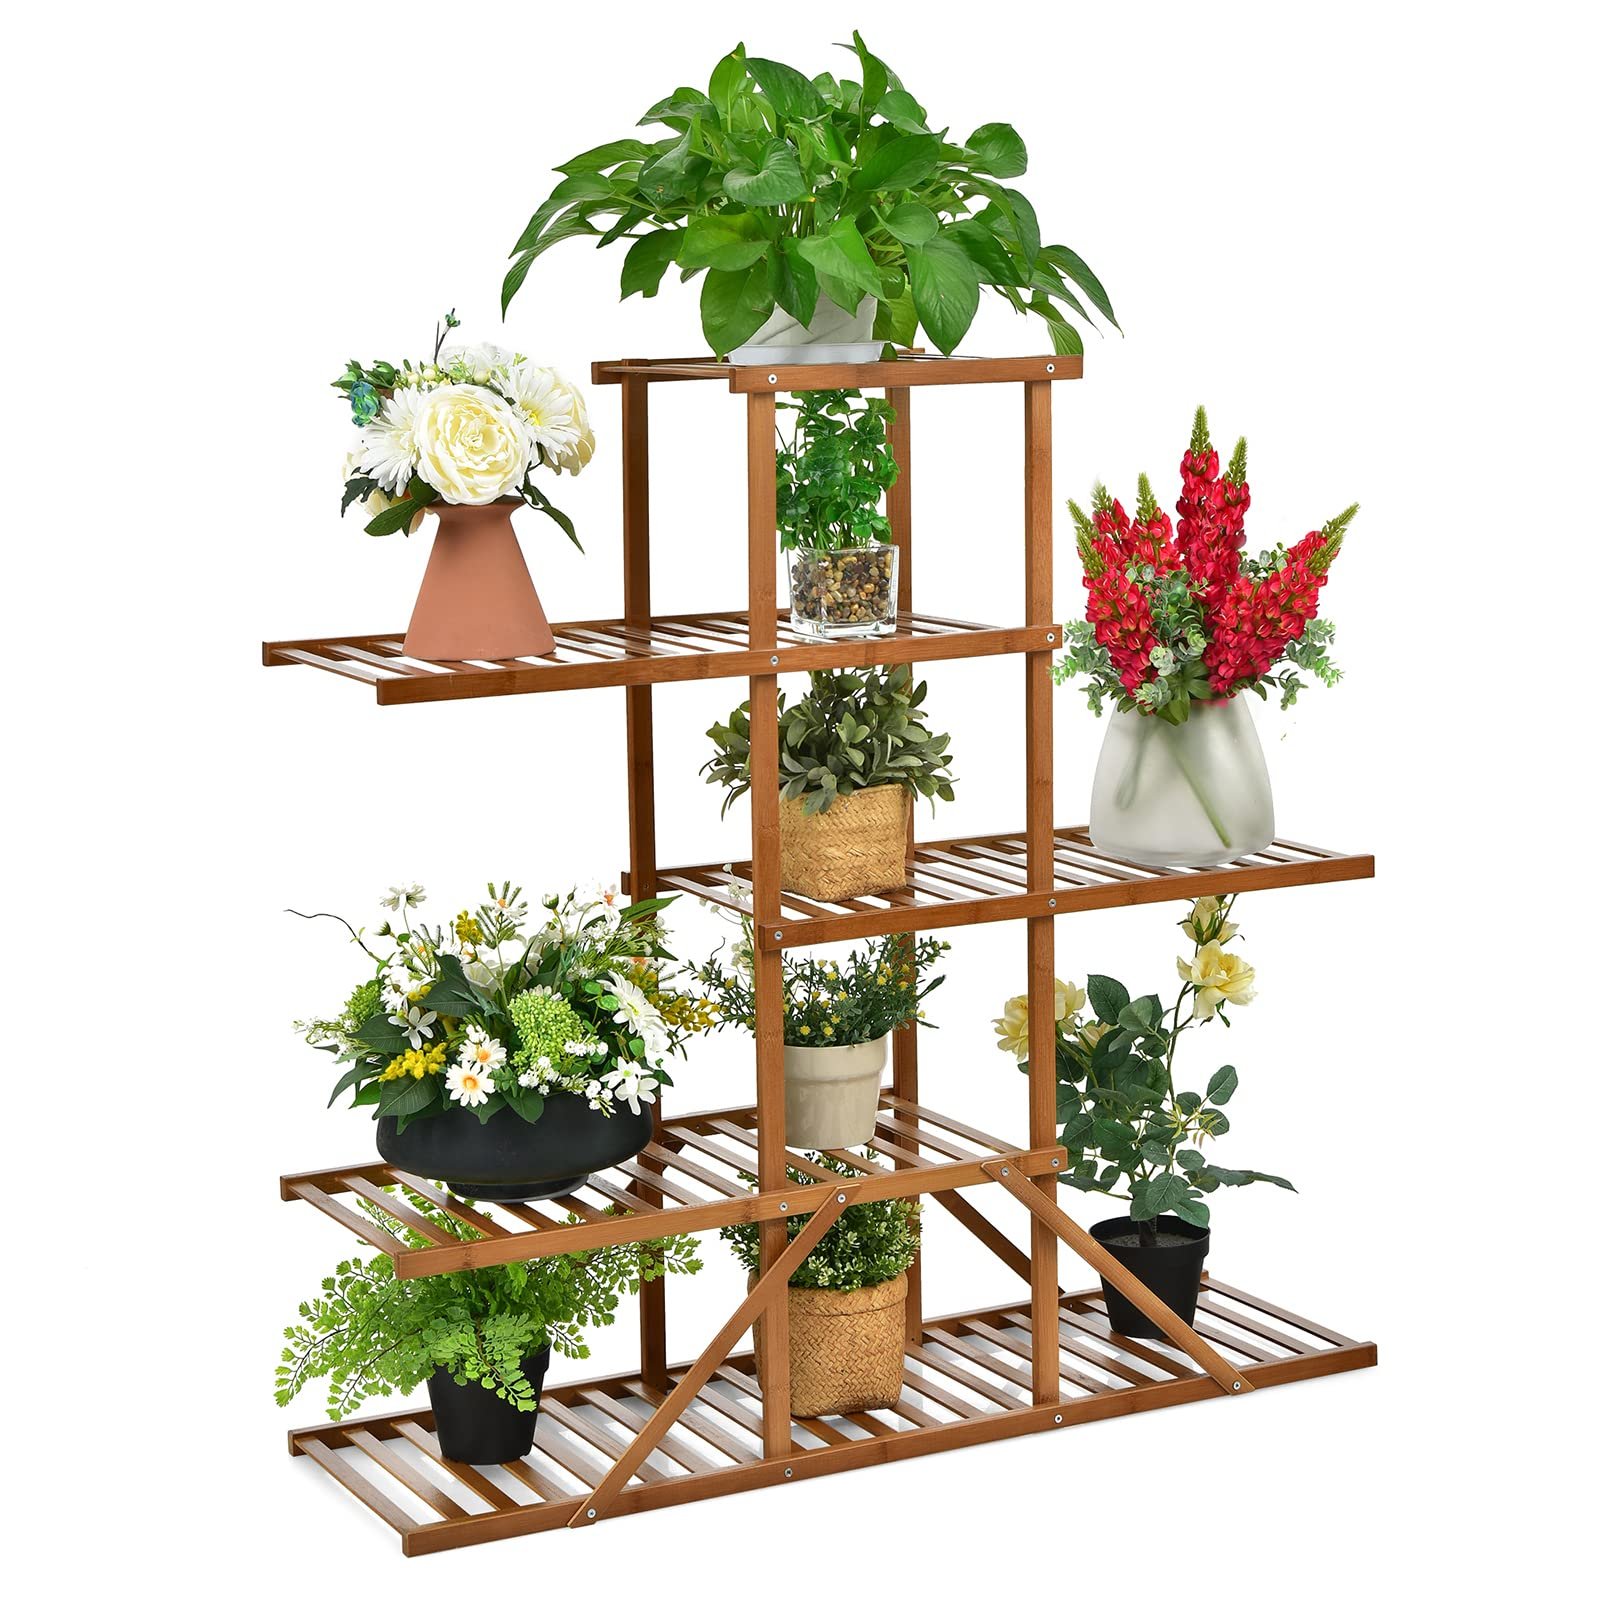 Giantex 5 Tier 10 Potted Plant Stand, Bamboo Plant Rack Flower Pots Holder Storage Shelf